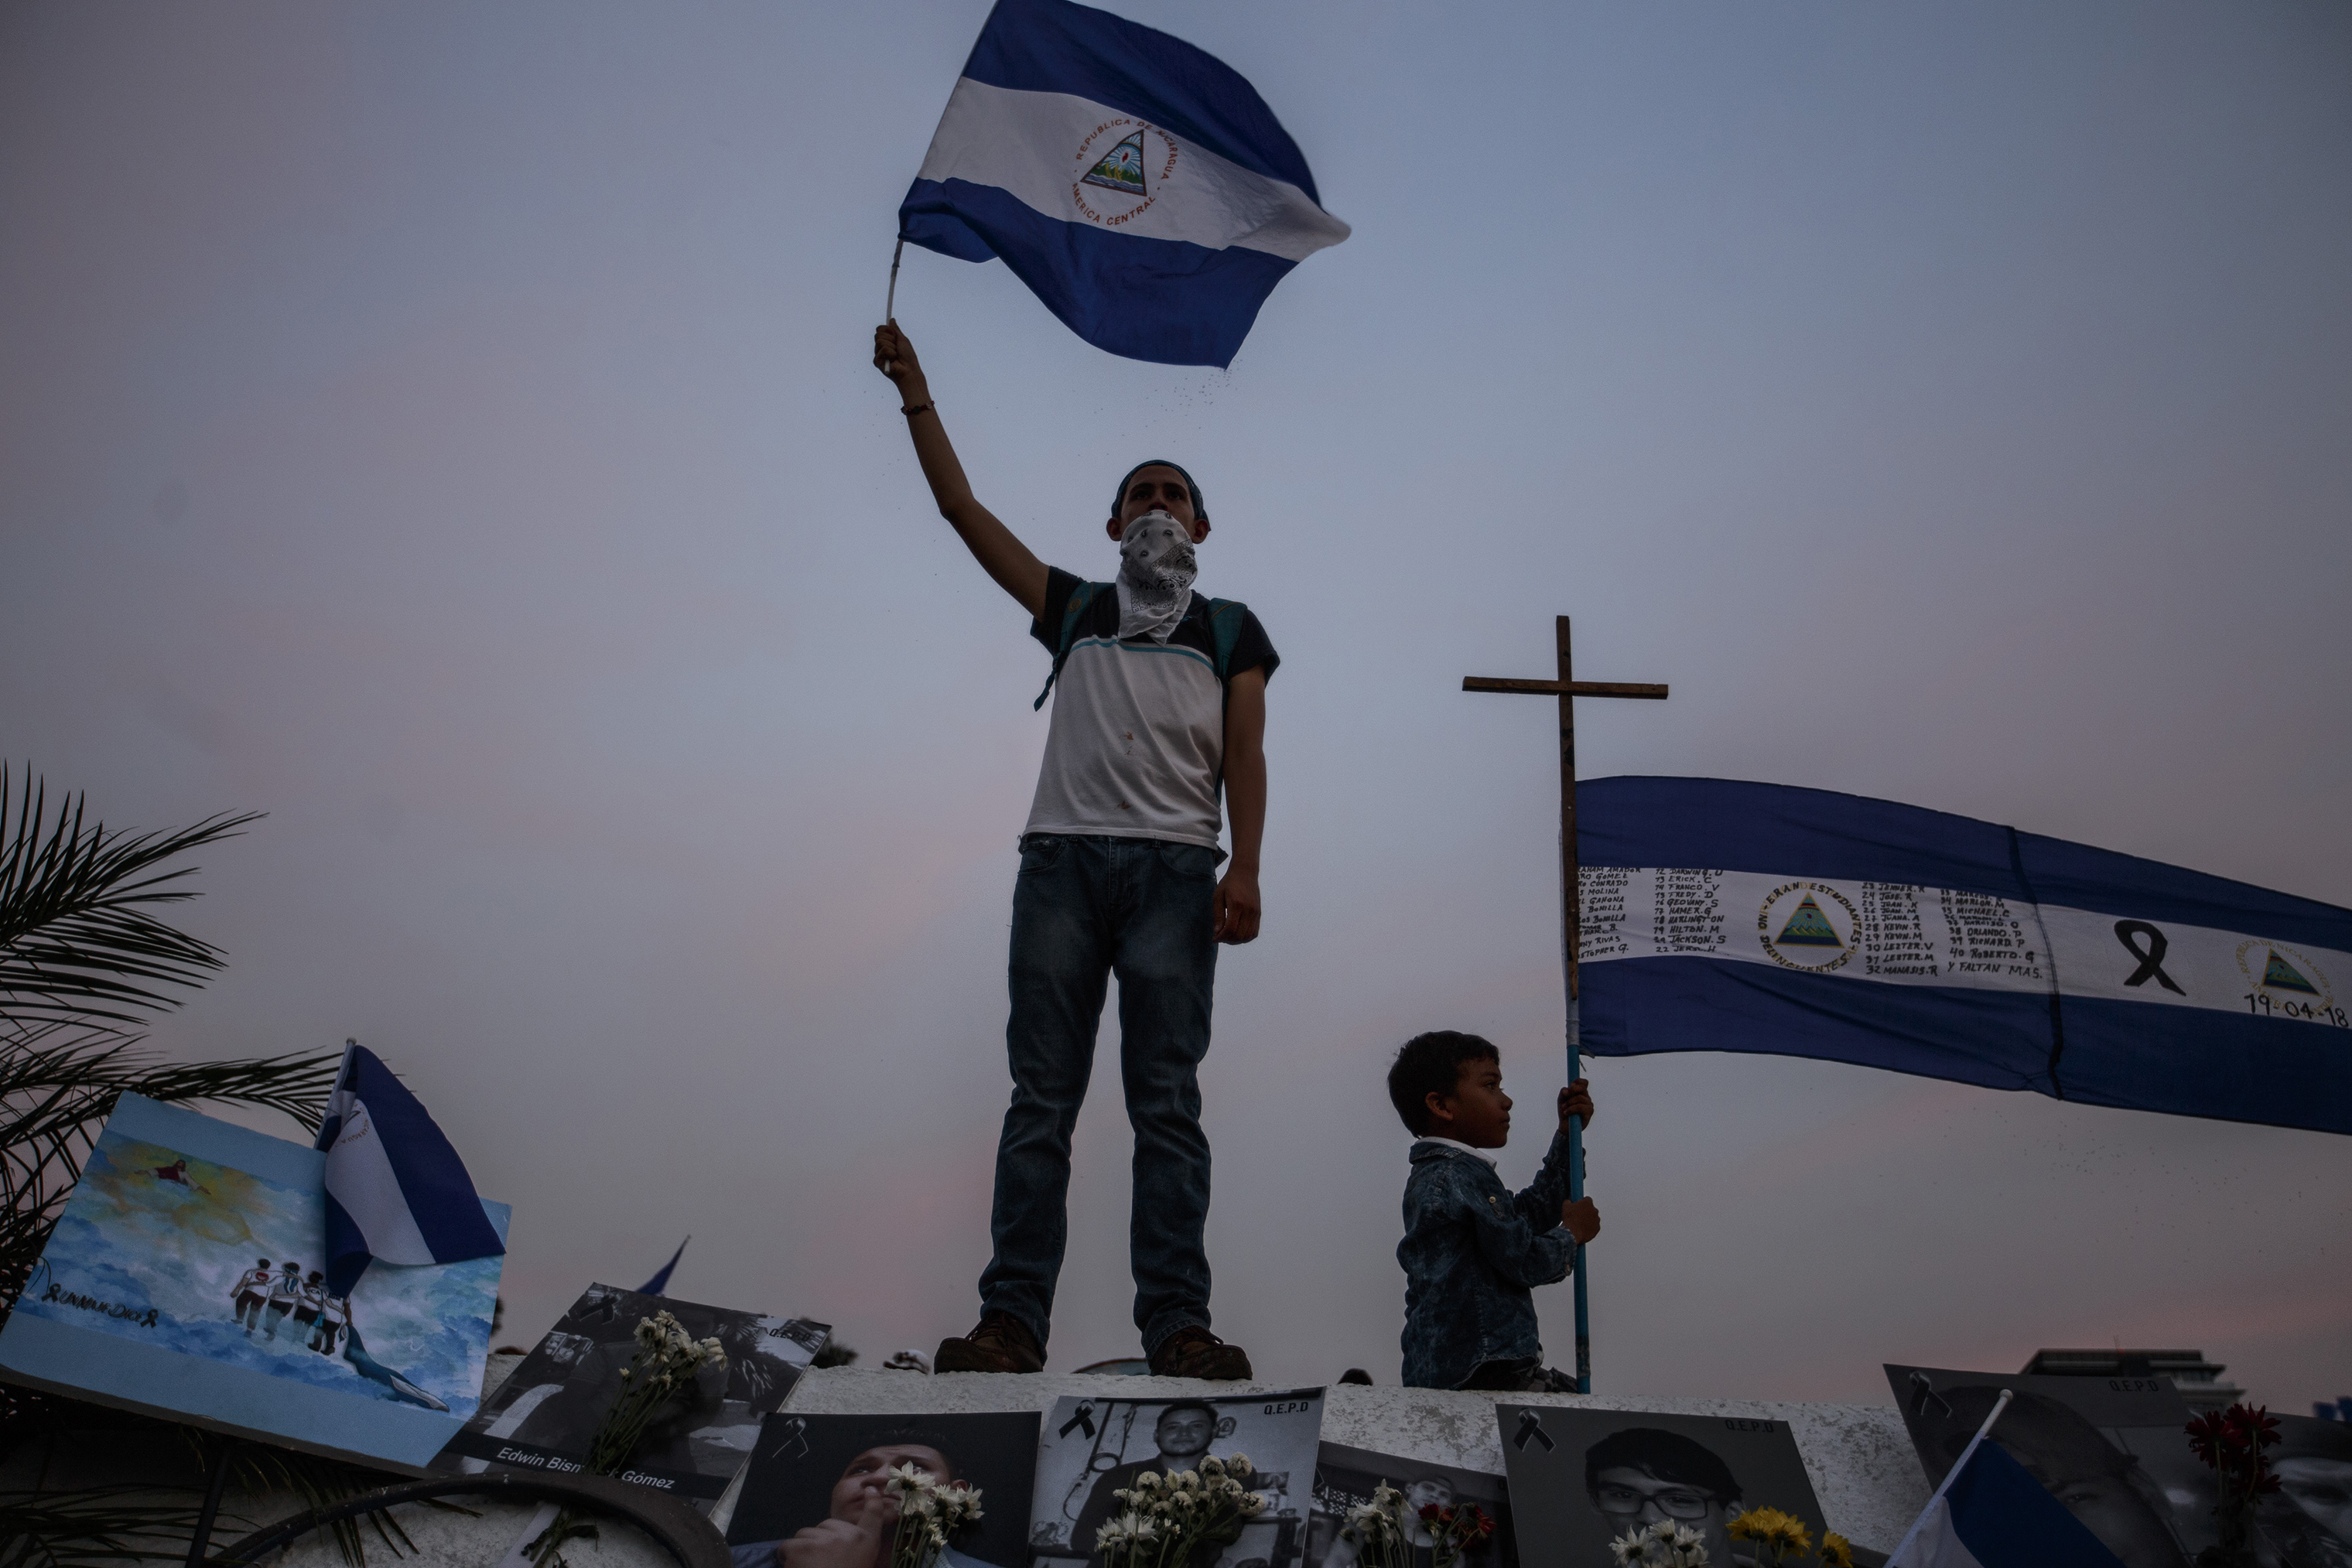 A demonstrator waves a flag during a protest in Managua on April 29. (Fred Ramos—El Faro)